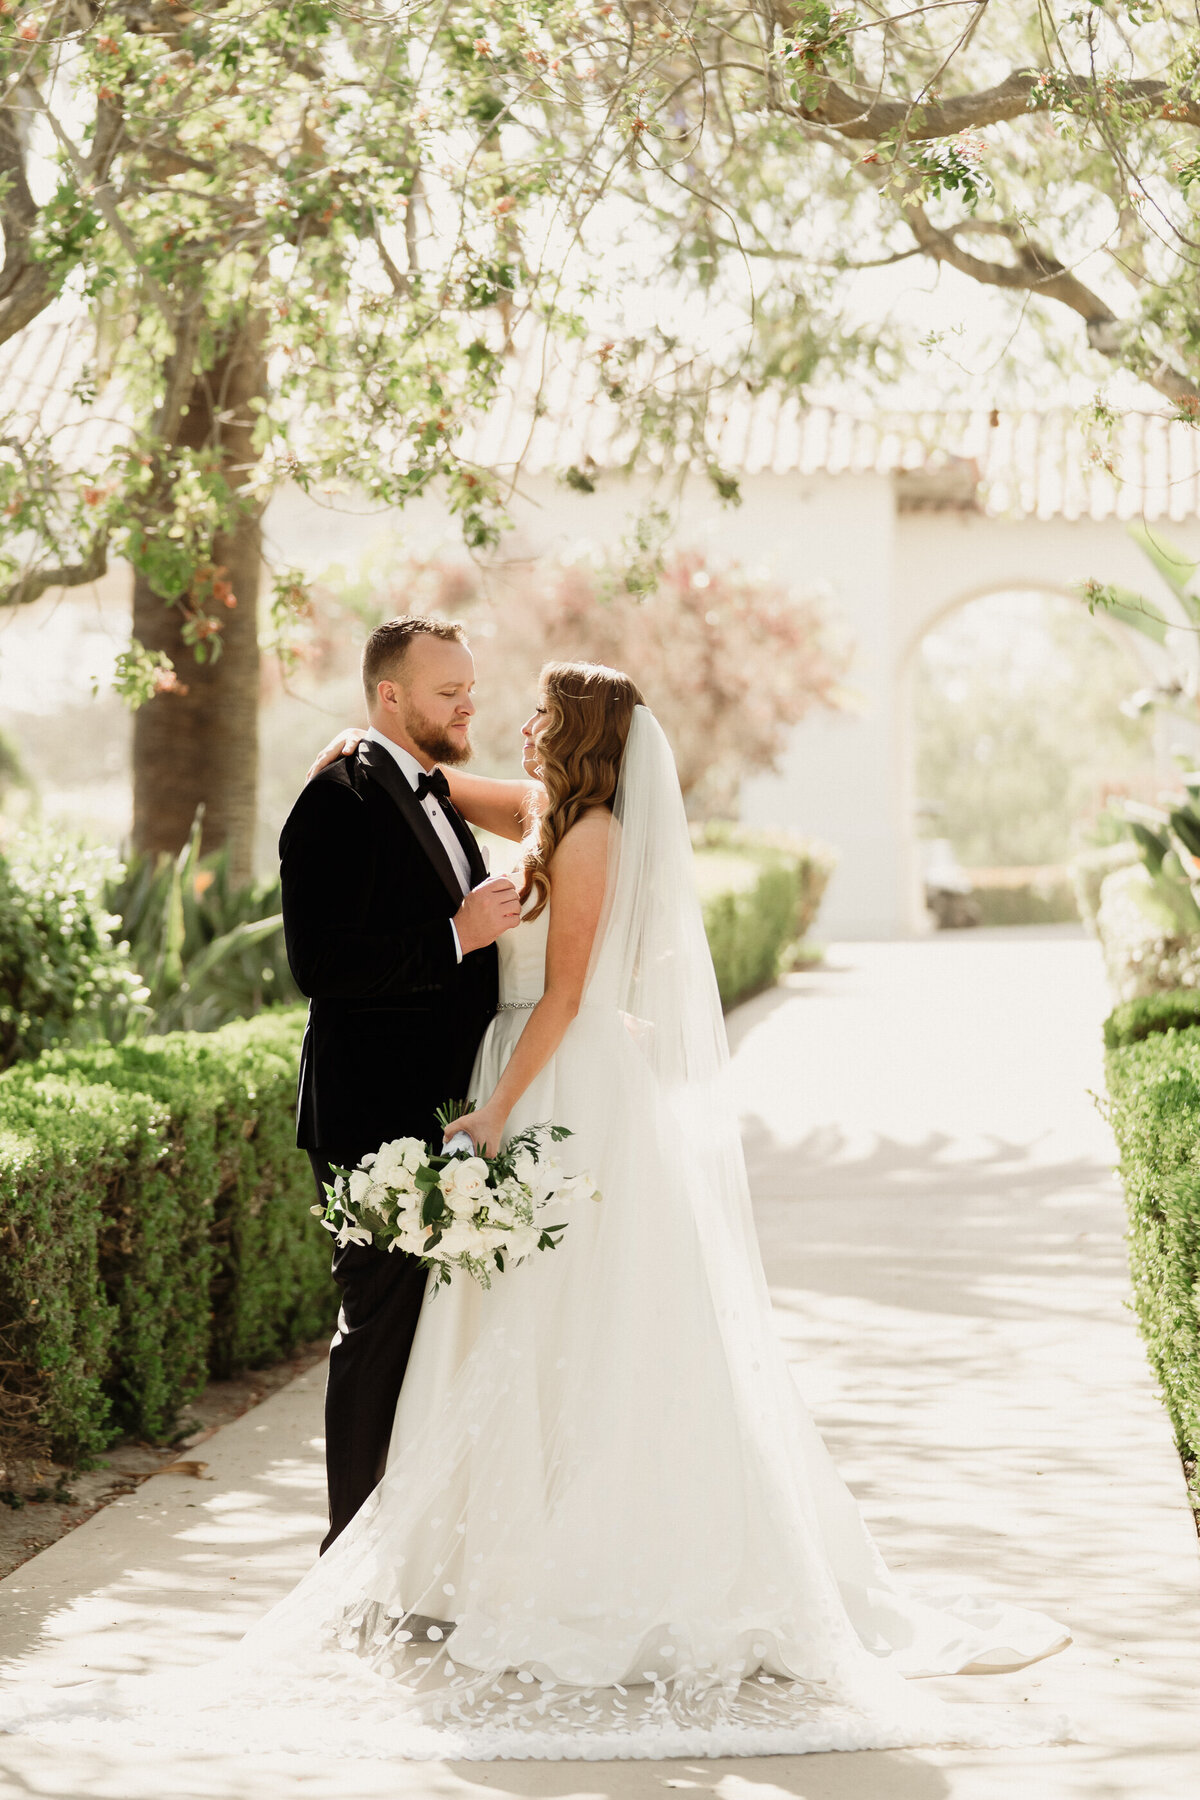 groom in a black tux with a bowtie and bride in a white dress with a cathedral polka dot veil with a large white bouquet talking during romantic wedding photography at spanish hills country club captured by los angeles wedding photographer magnolia west photography